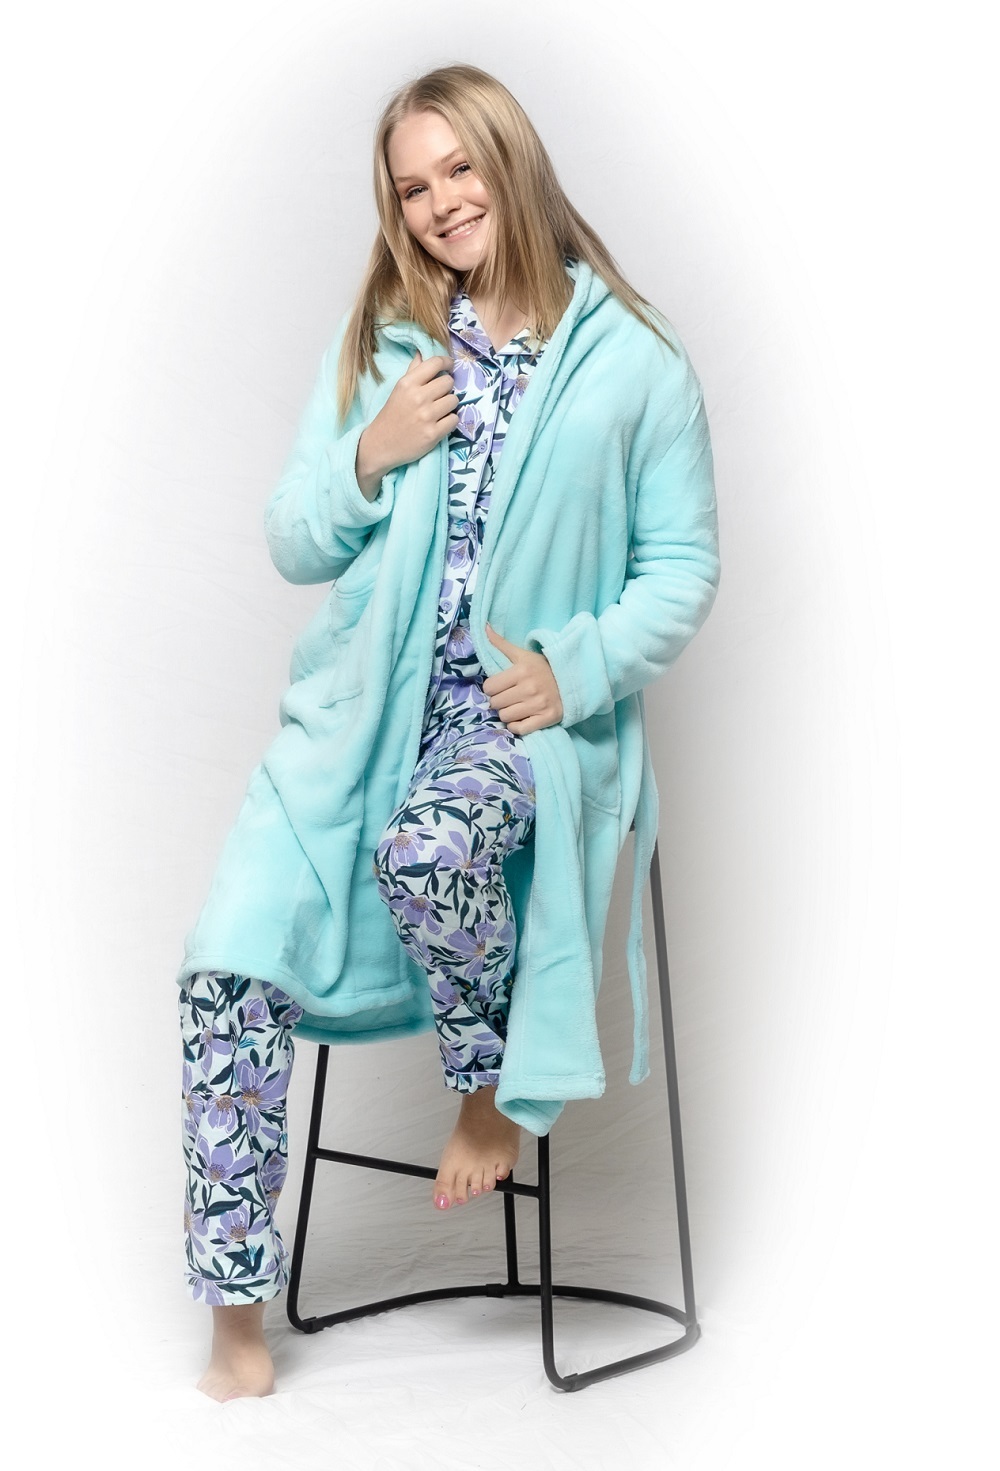 Women's Dressing Gowns, Bath Robes & Night Gowns